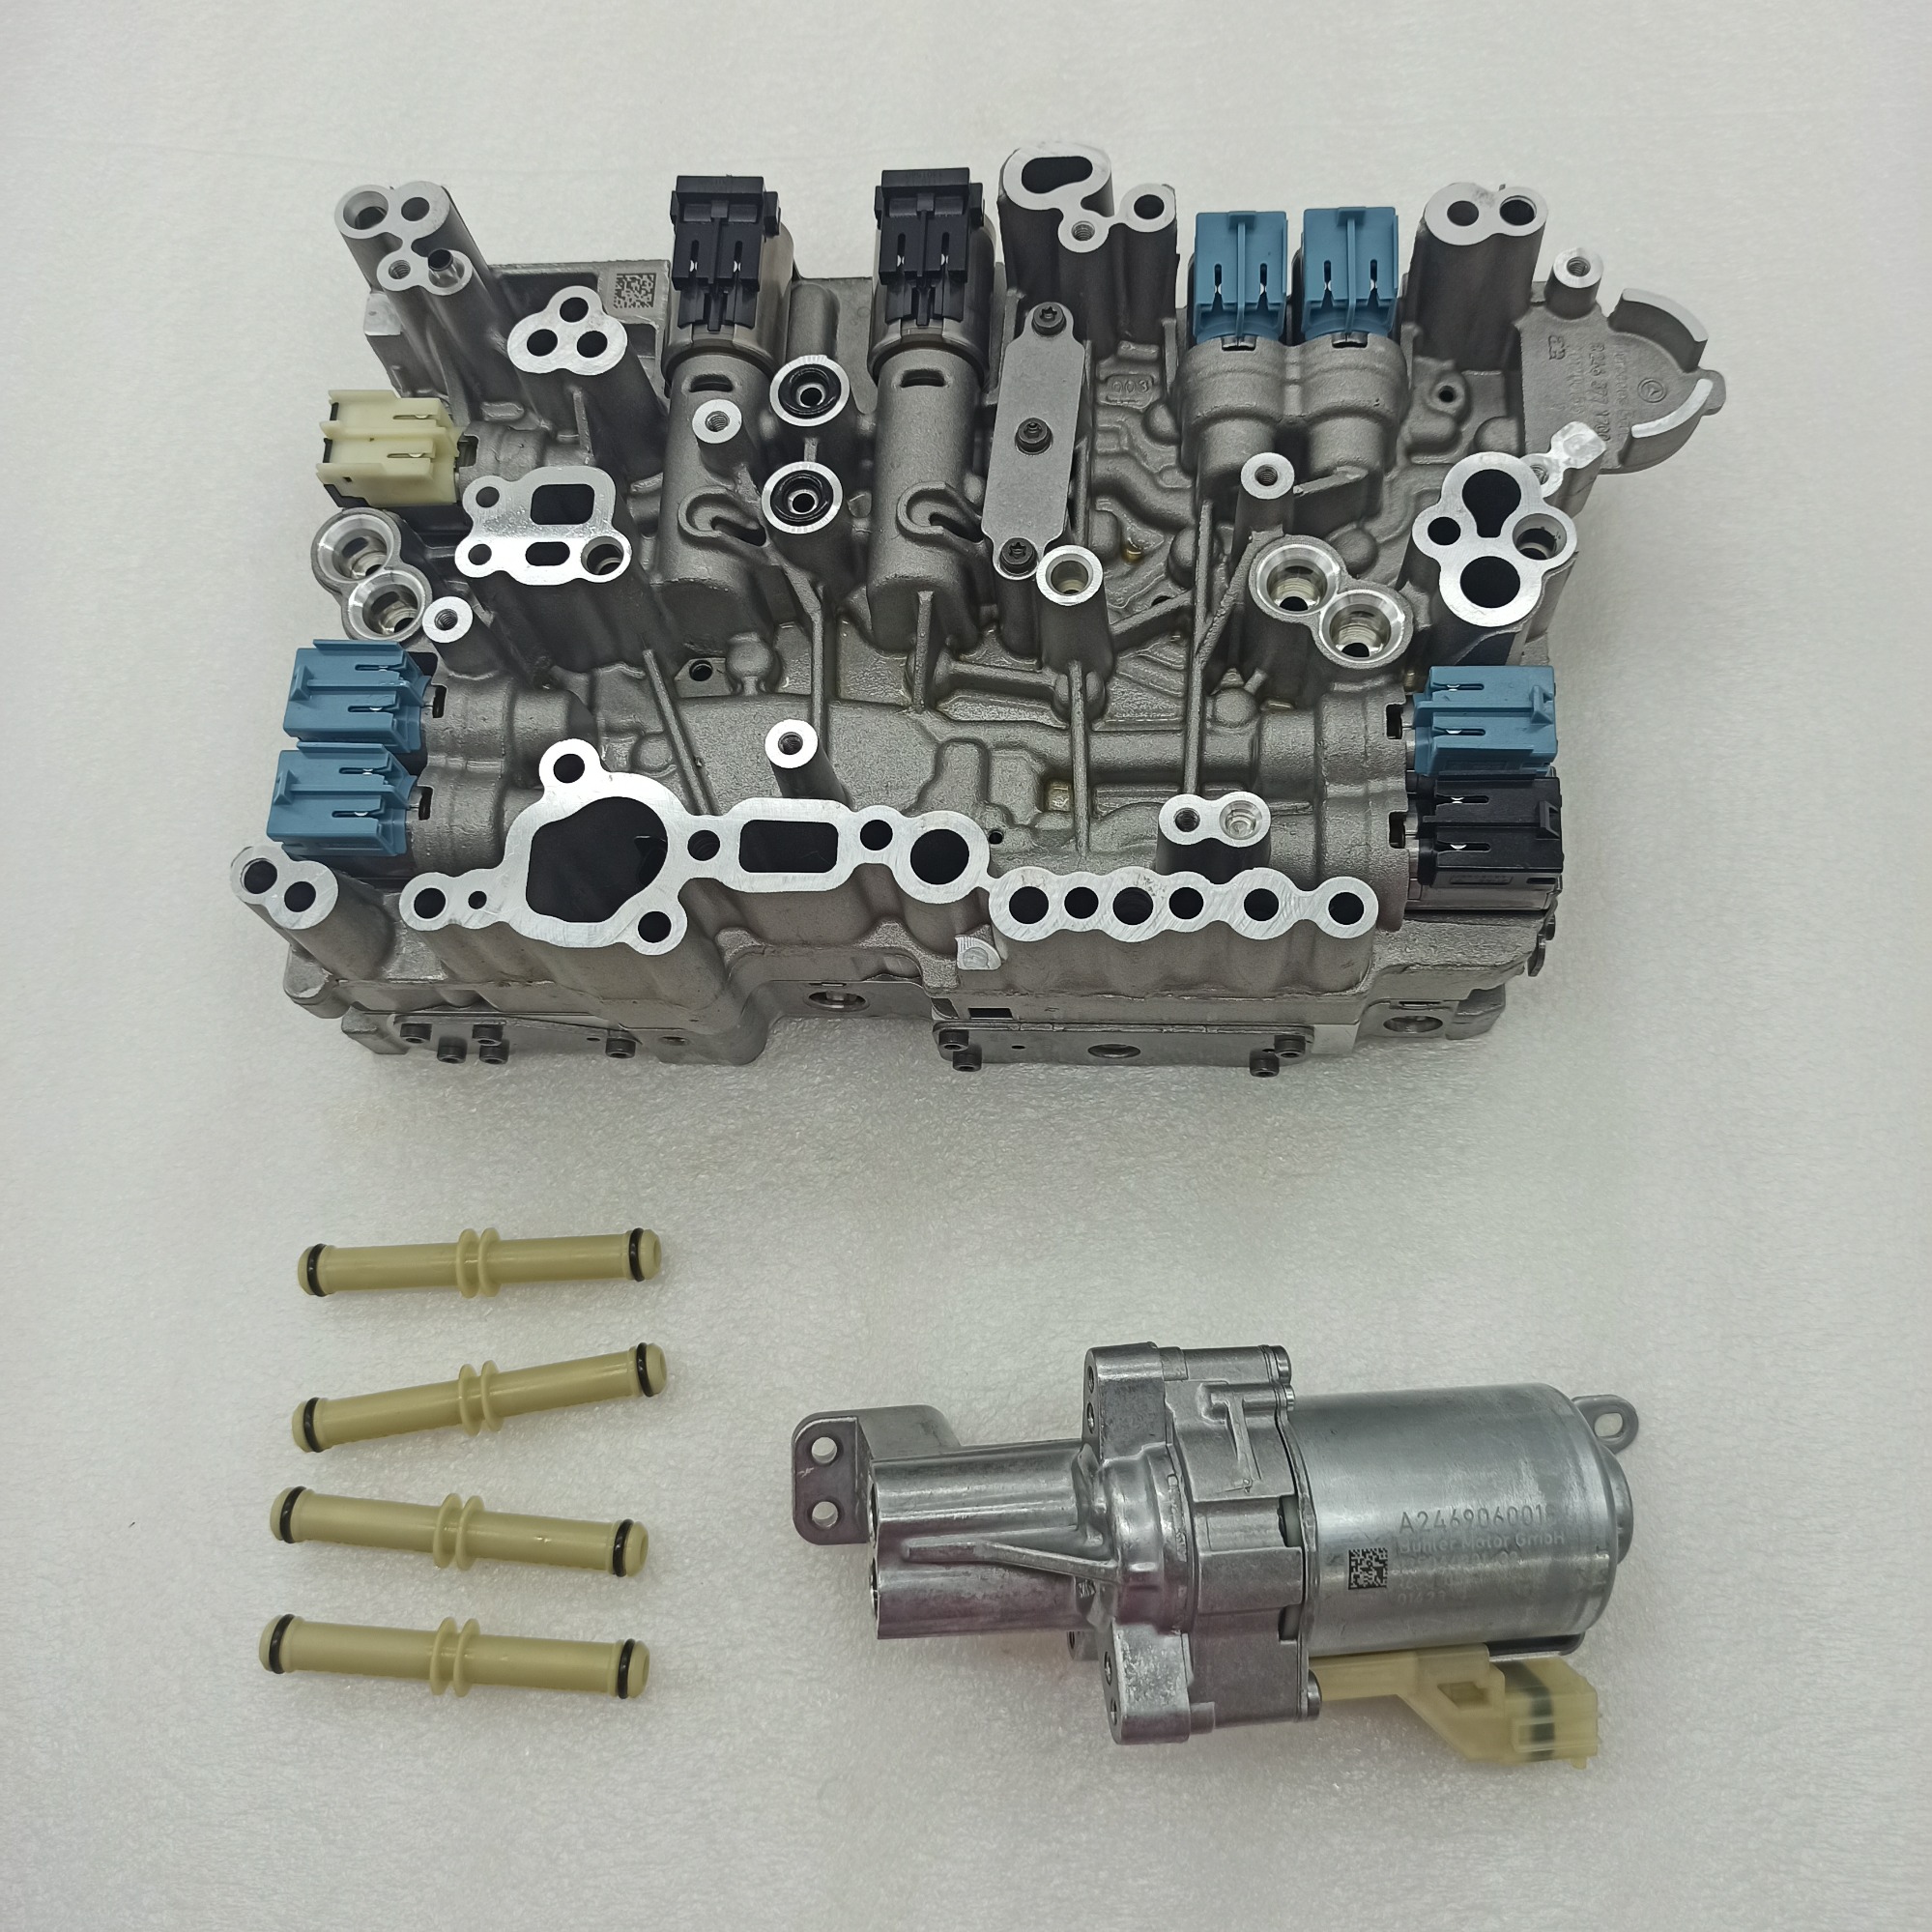 724-0009-FN 724 AUTOMATIC TRANSMISSION VALVE BODY work with 4pins tcu, new model